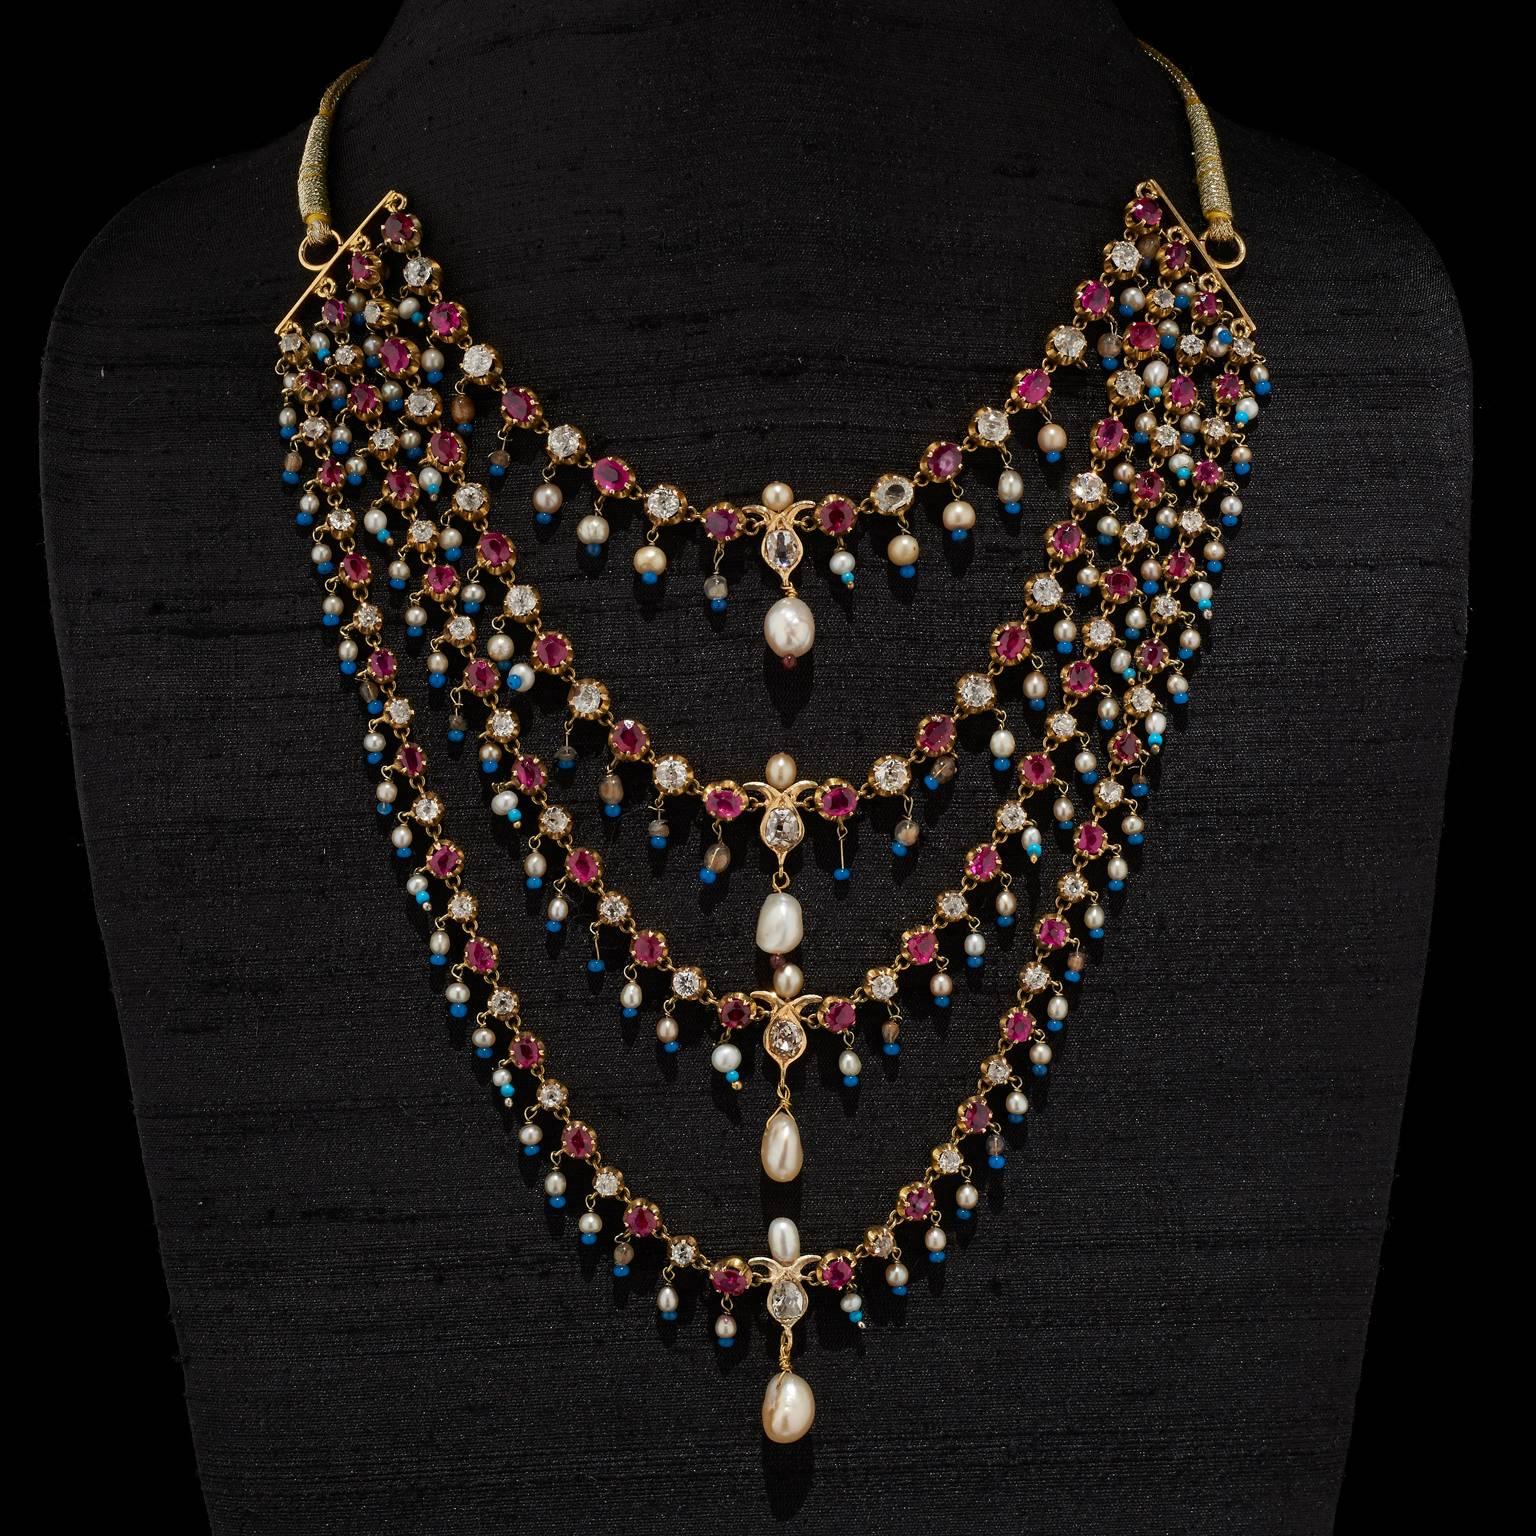 Necklace
Calcutta, West Bengal, India
19th Century

Fabricated from gold. The necklace comprises four rows of diamonds and rubies suspended with natural pearls and glass beads. Four diamond pendants in gold surmounted by a natural pearl and